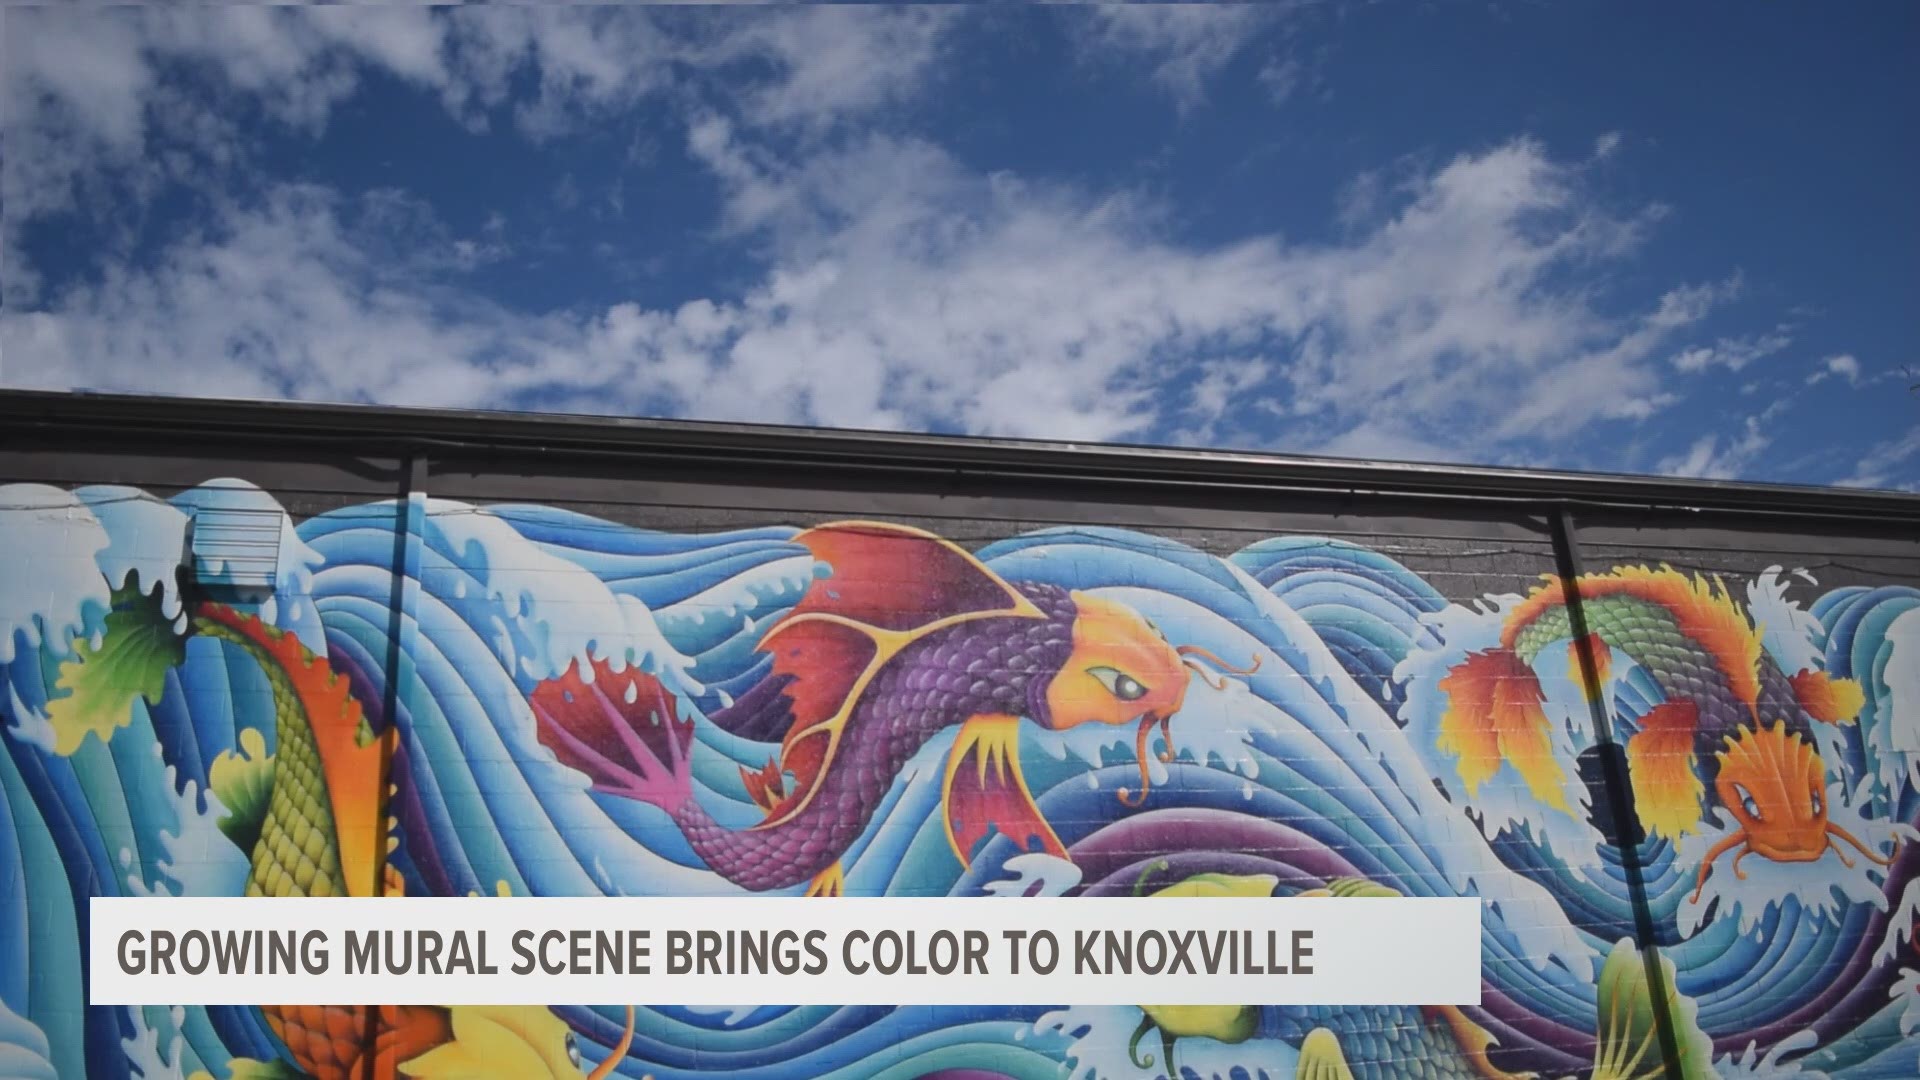 Murals are popping up all over the city, which is in part due to one artist who works overtime to fill Knoxville with color.